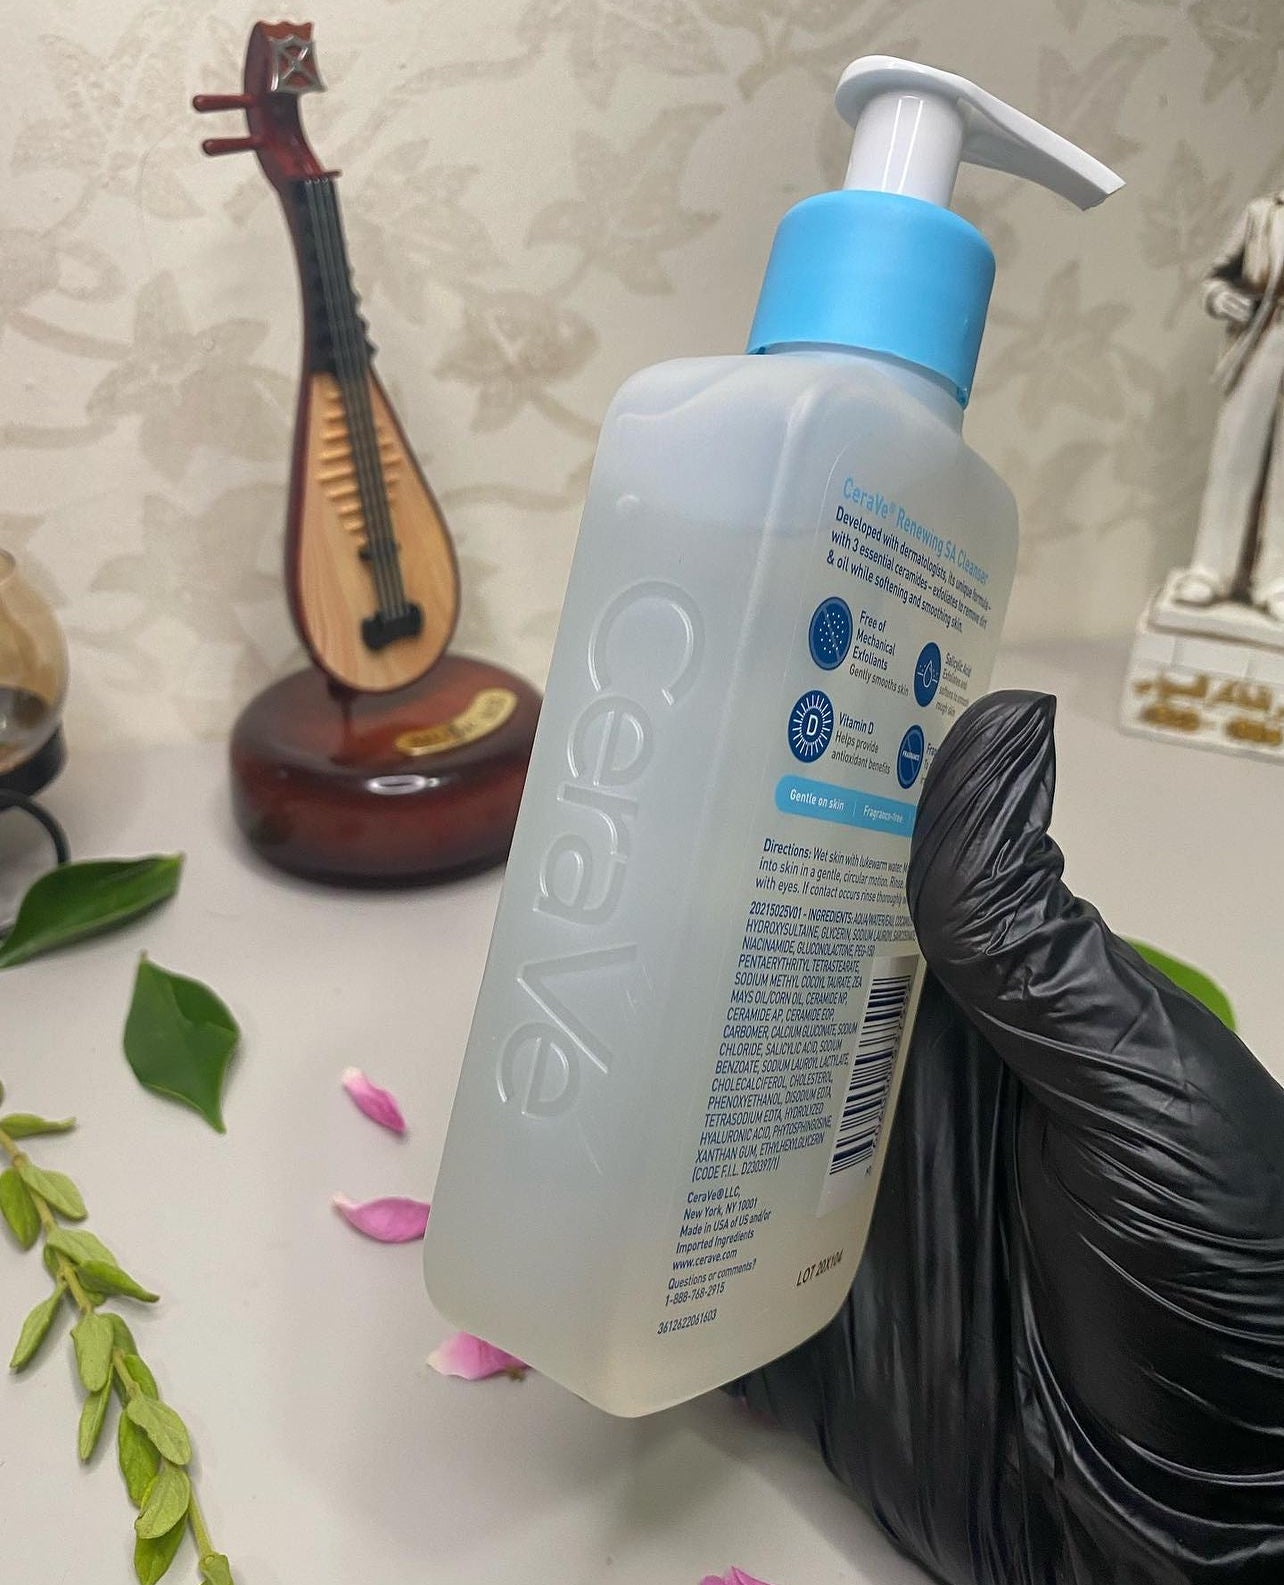 CeraVe Renewing SA Cleanser 237ML